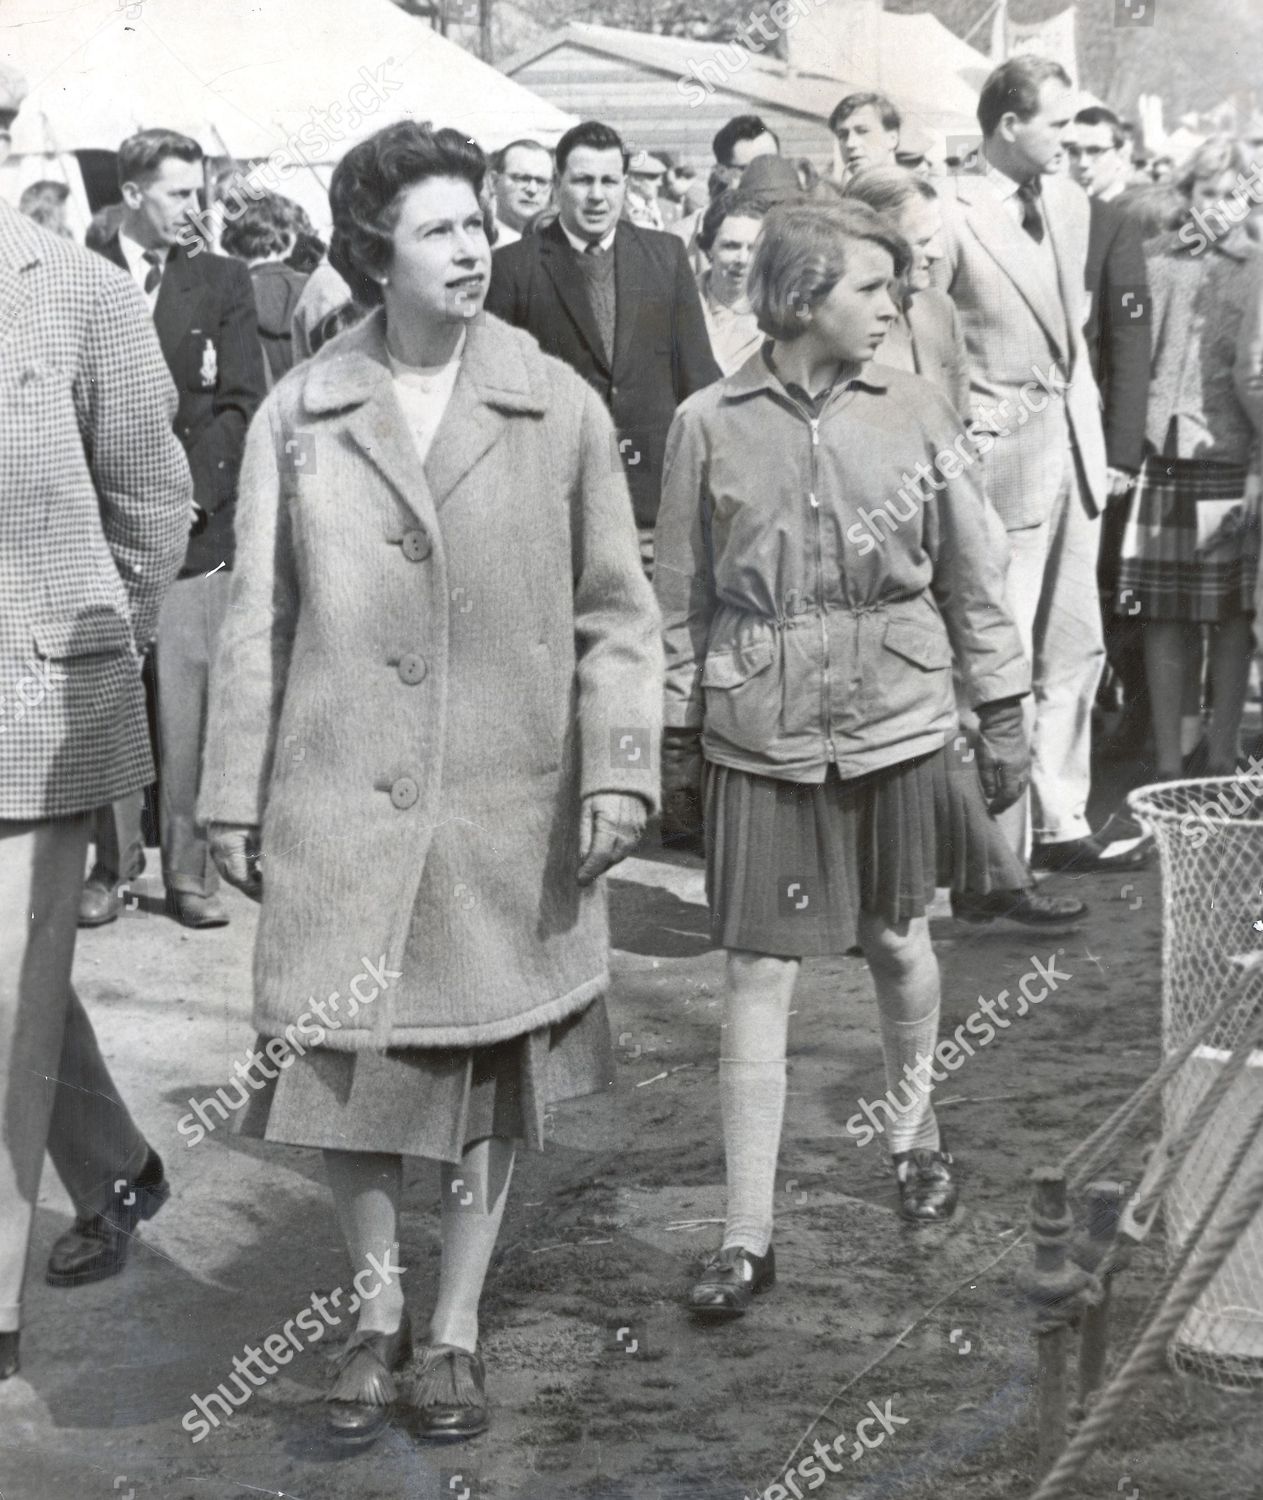 queen-elizabeth-ii-and-princess-anne-walk-around-the-tents-at-the-badminton-horse-trials-where-they-were-guests-of-the-duke-of-beaufort-1962-shutterstock-editorial-1045630a.jpg